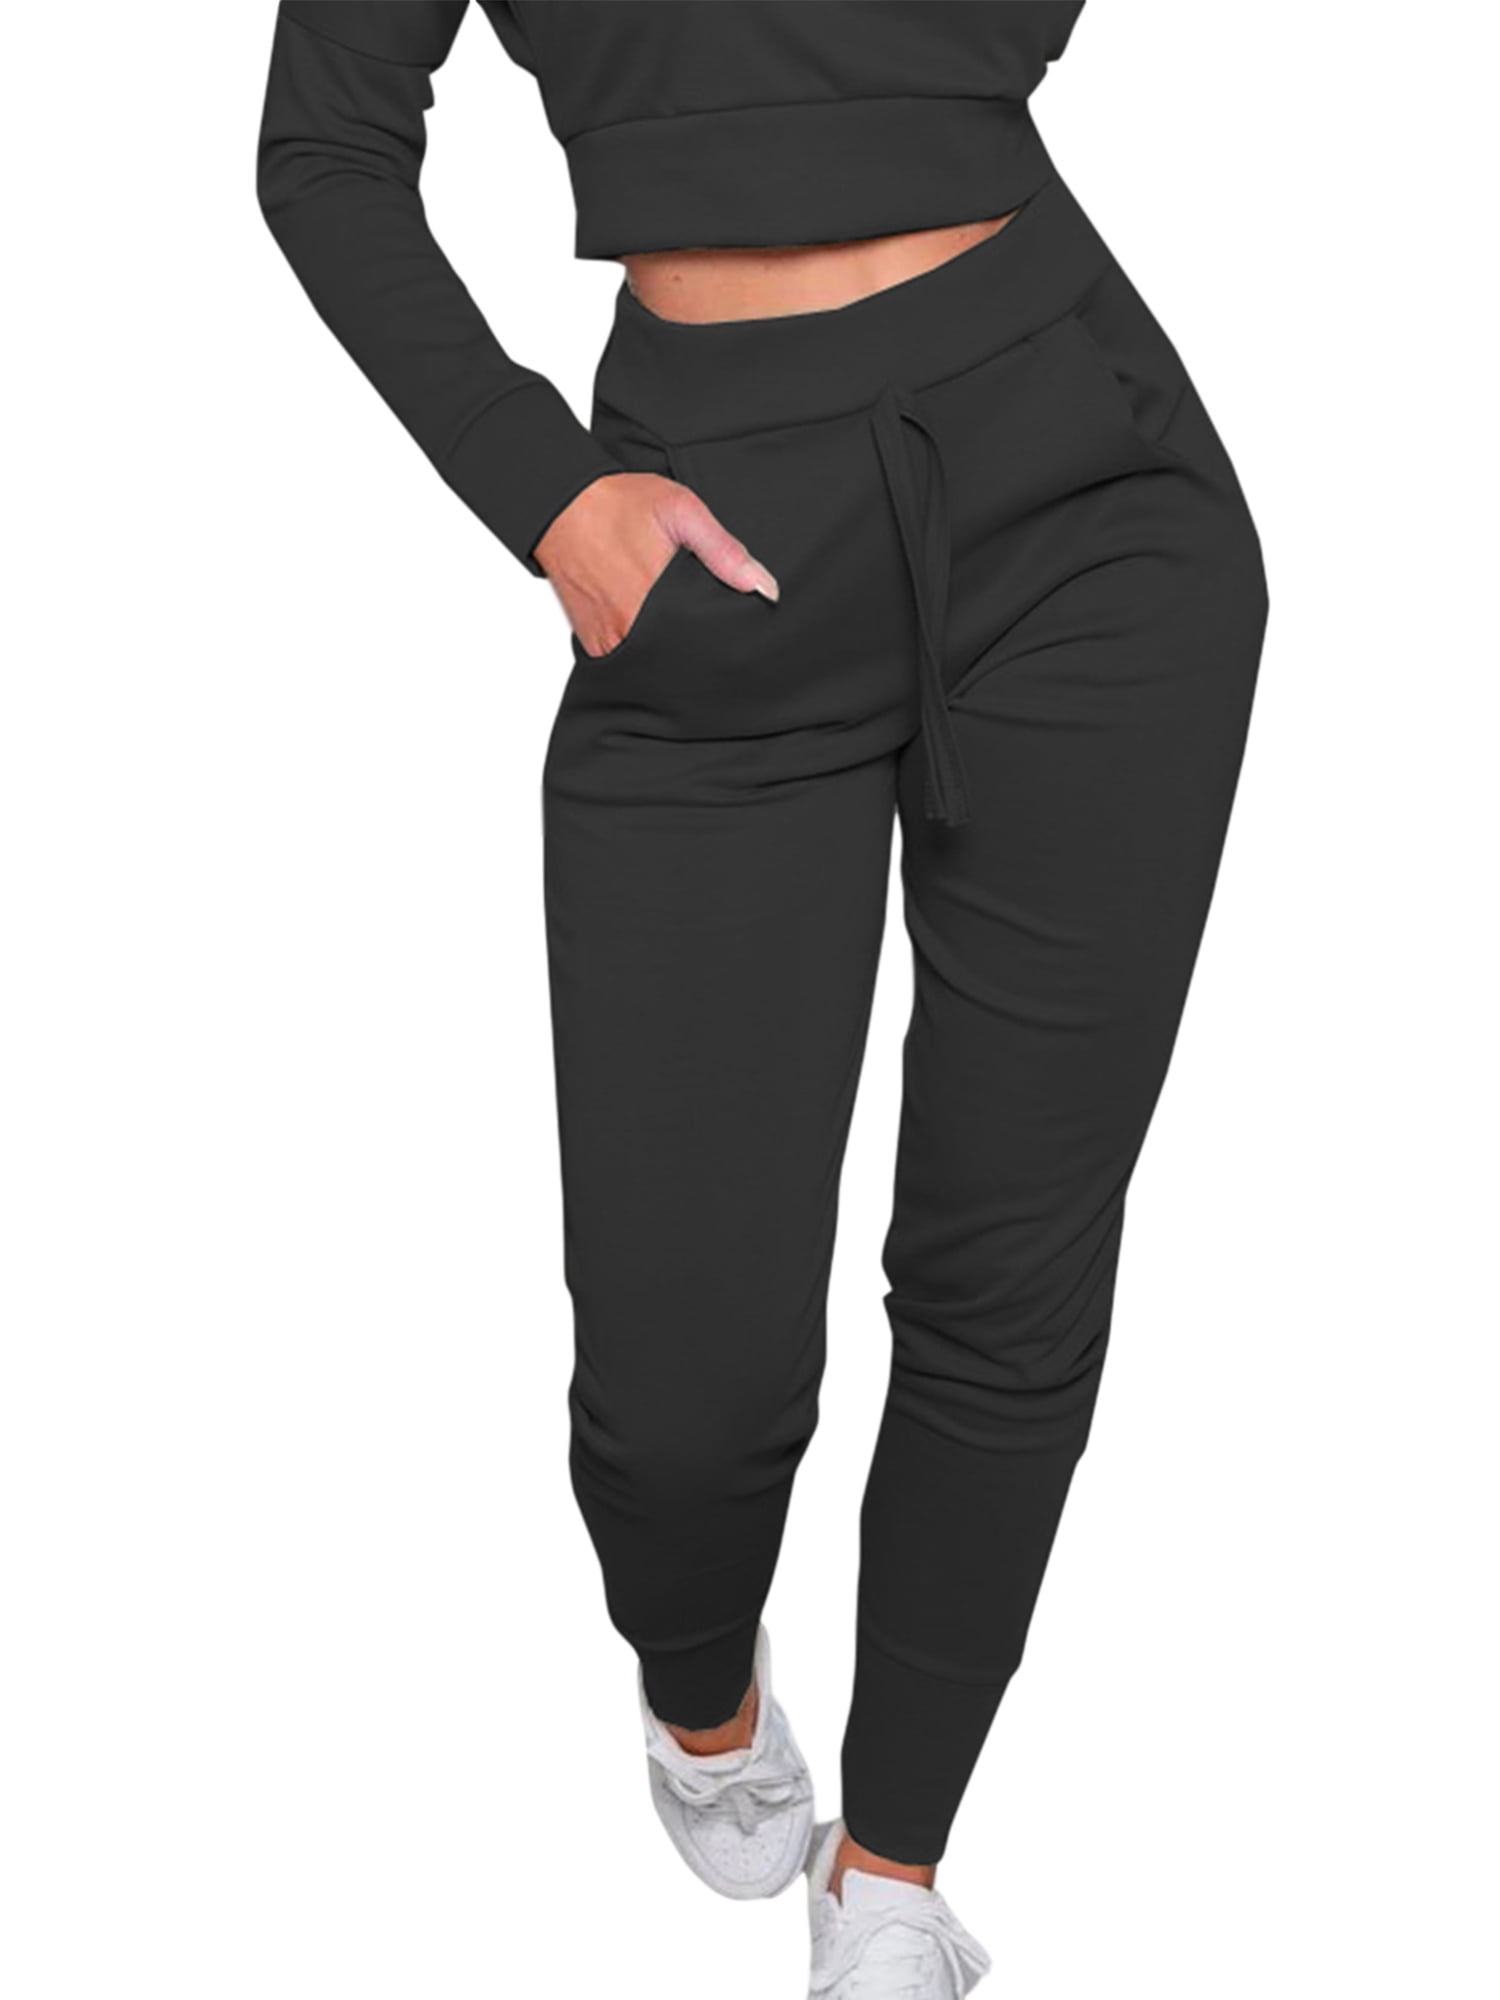 Springcmy Women Jogger Casual Elastic Waist Ankle Cuff Tight Sweatpants